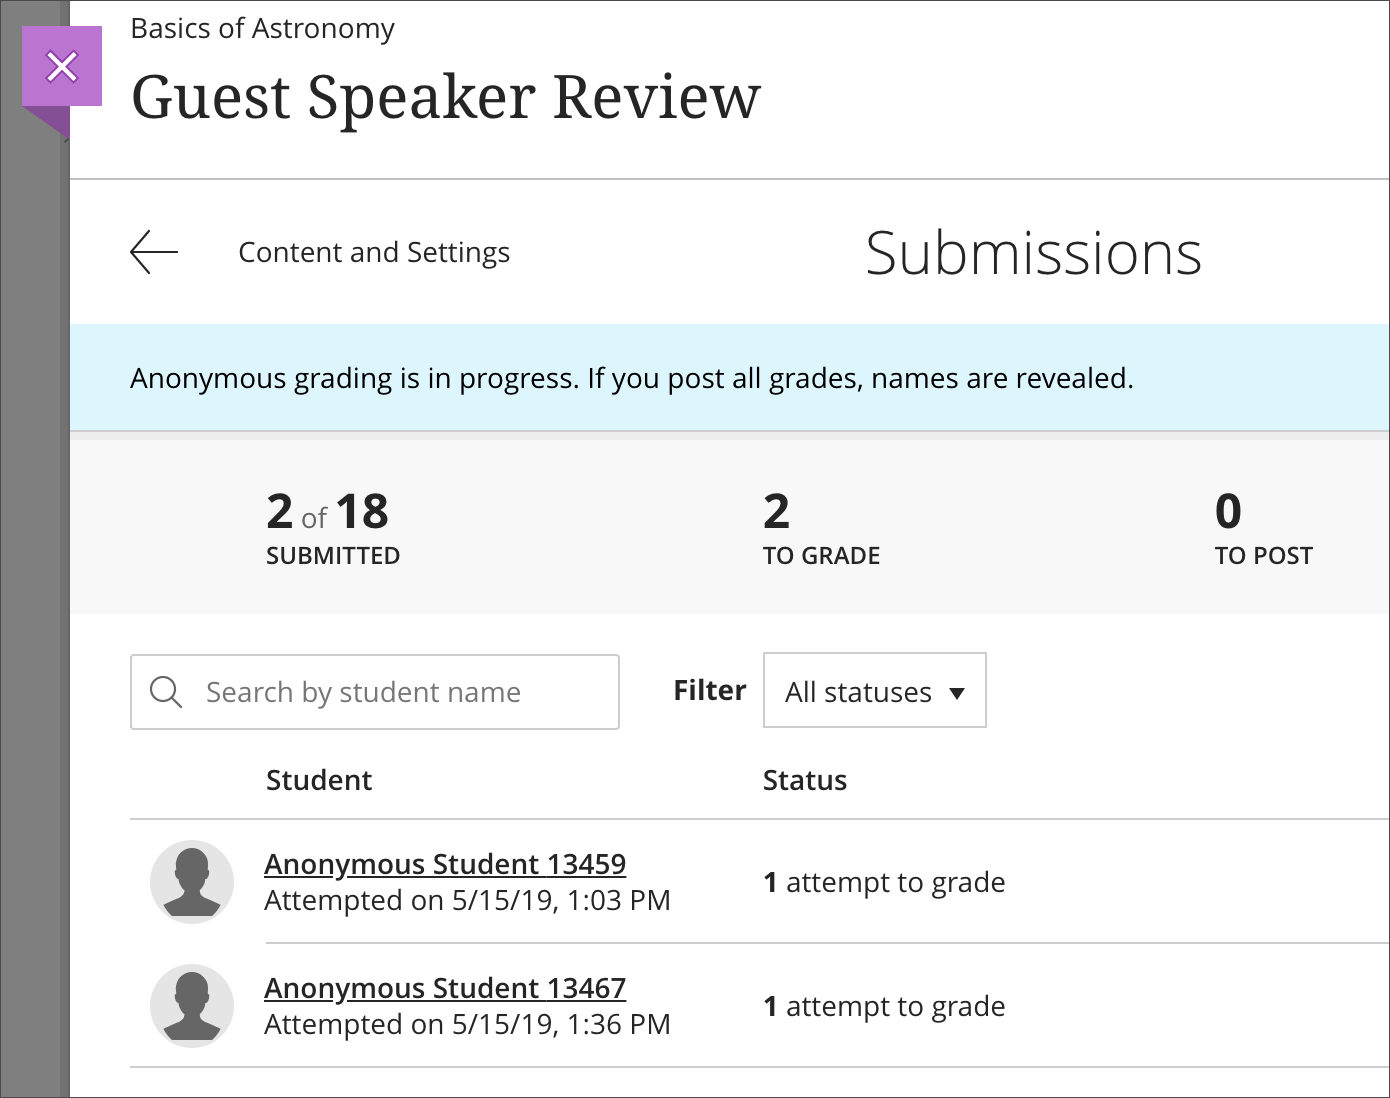 The Submissions page is open with the anonymous submissions list on screen. The notification that indicates the anonymous grading is in progress is displayed.